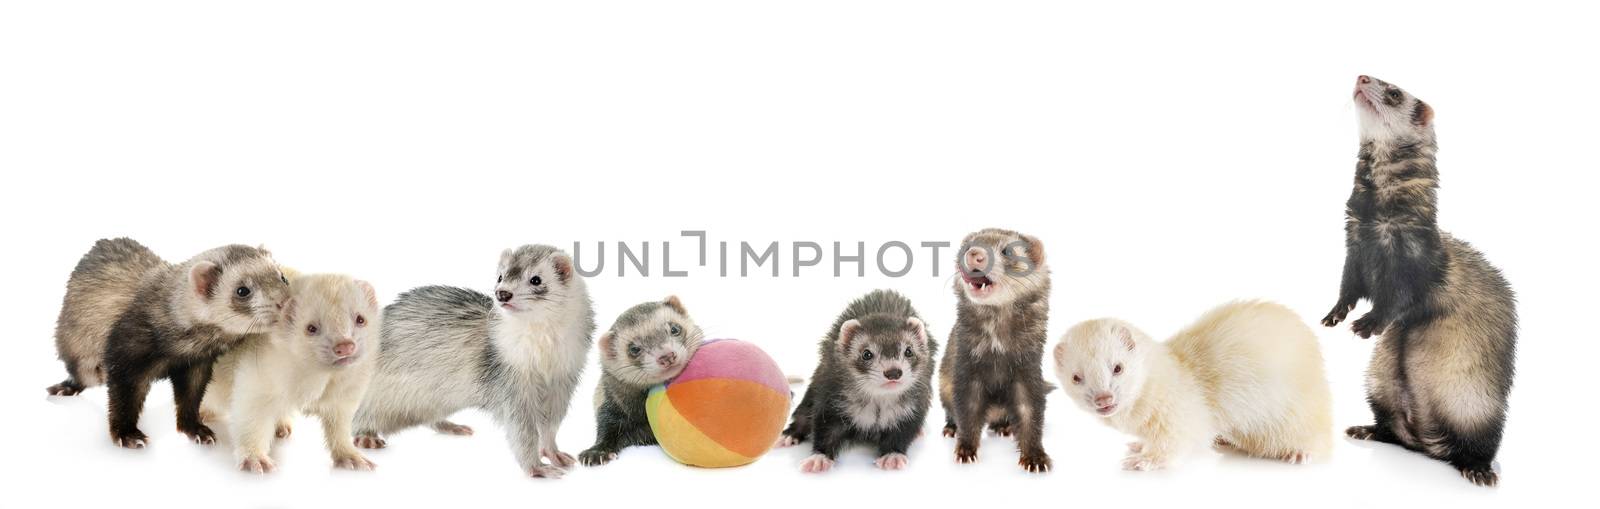 group of ferrets in front of white background